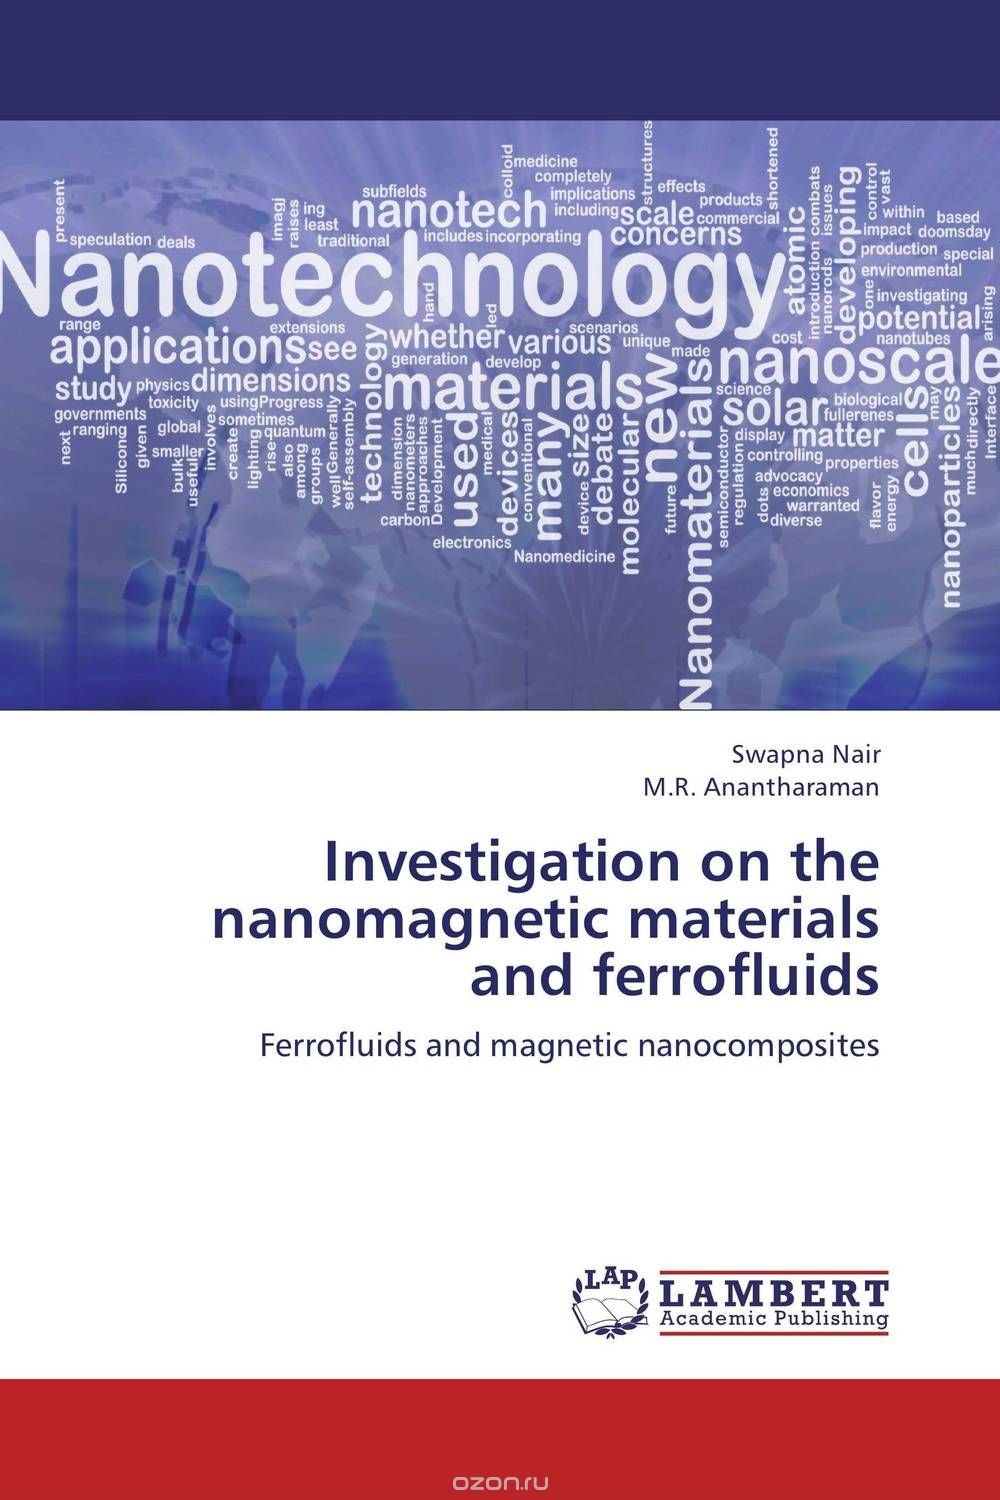 Investigation on the nanomagnetic materials and ferrofluids